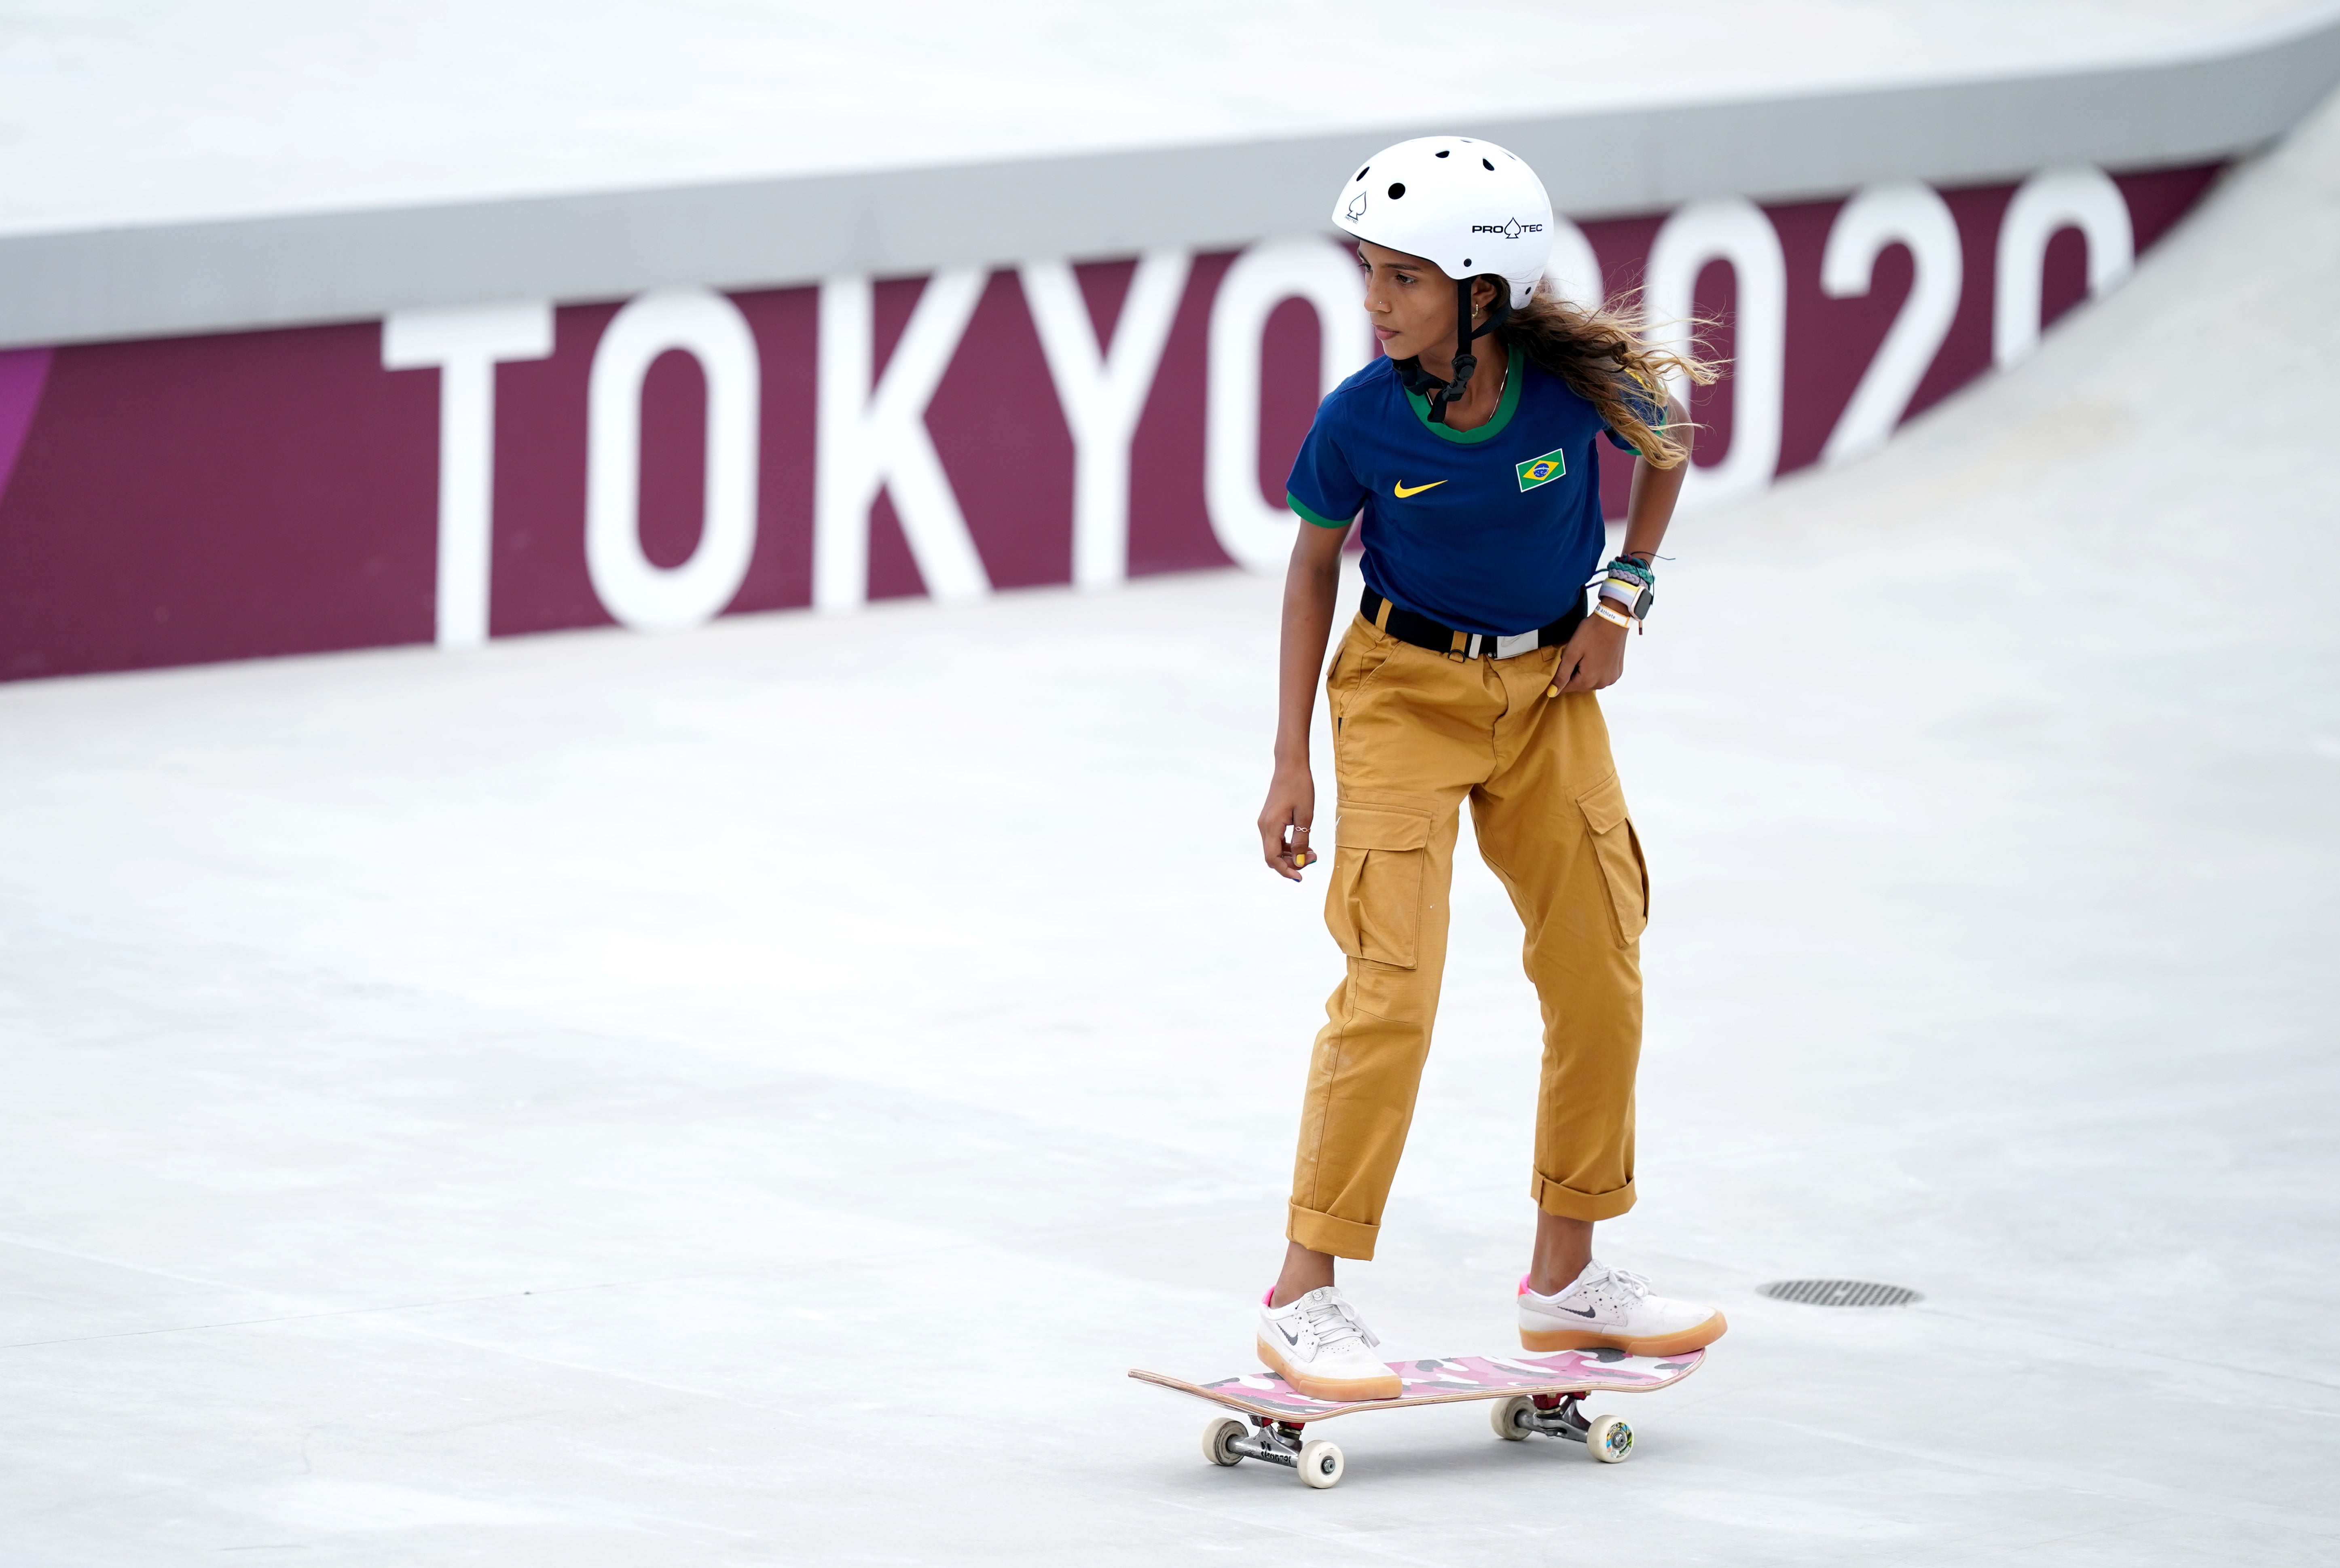 Brazil’s Rayssa Leal during the Women’s Street Prelims Heat 4 at the Ariake Urban Sports Park on the third day of the Tokyo 2020 Olympic Games in Japan. Picture date: Monday July 26, 2021.